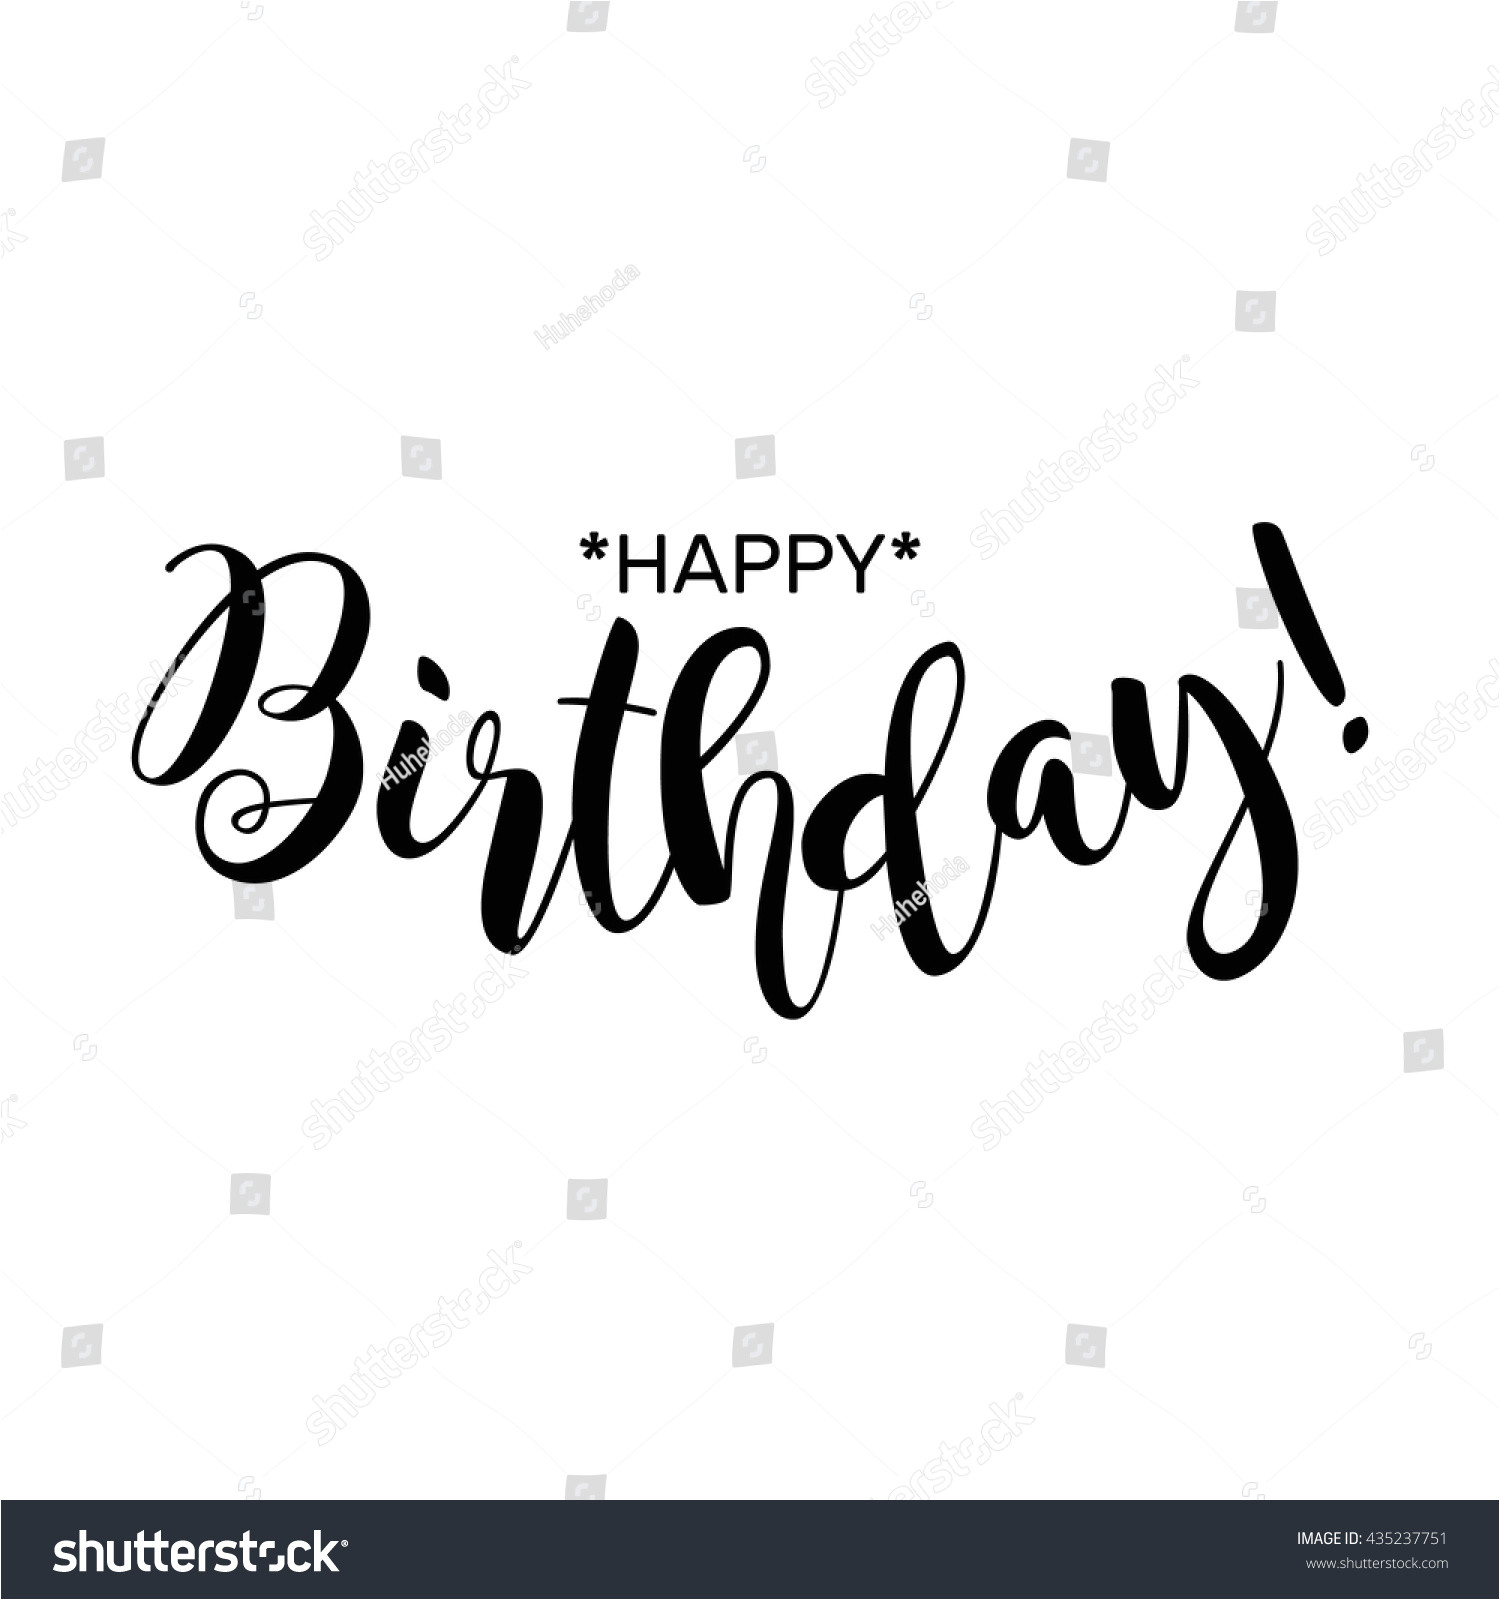 stock vector happy birthday beautiful greeting card poster with calligraphy black text word hand drawn design 435237751 jpg